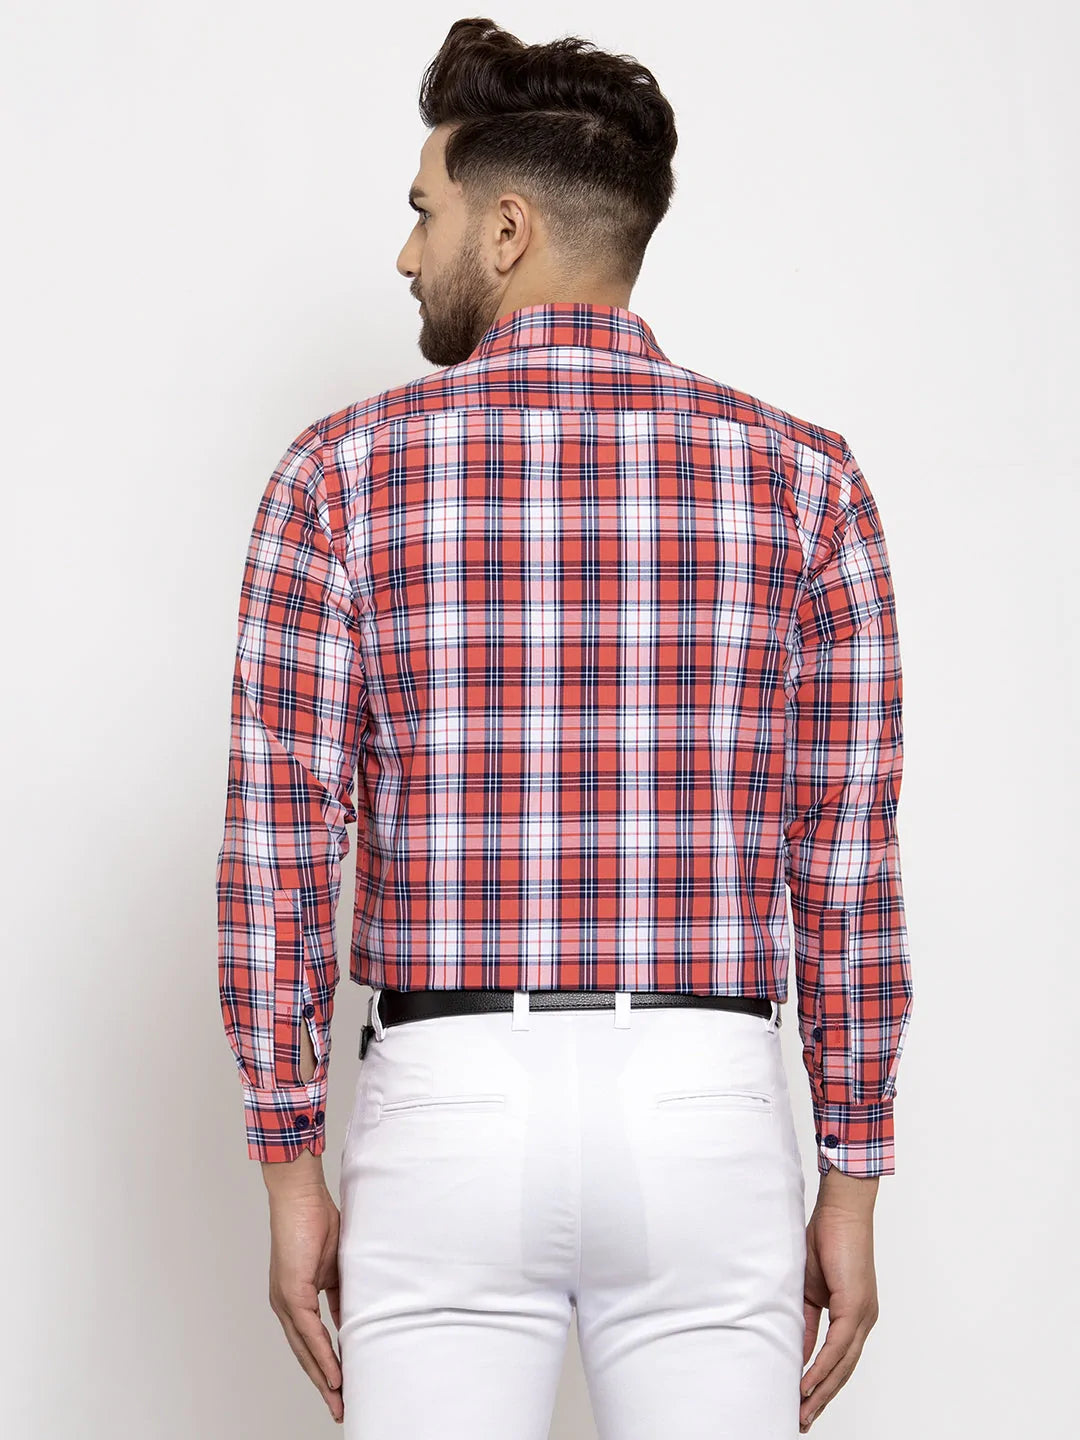 Jainish Red Men's Cotton Checked Formal Shirt's ( SF 764Red )